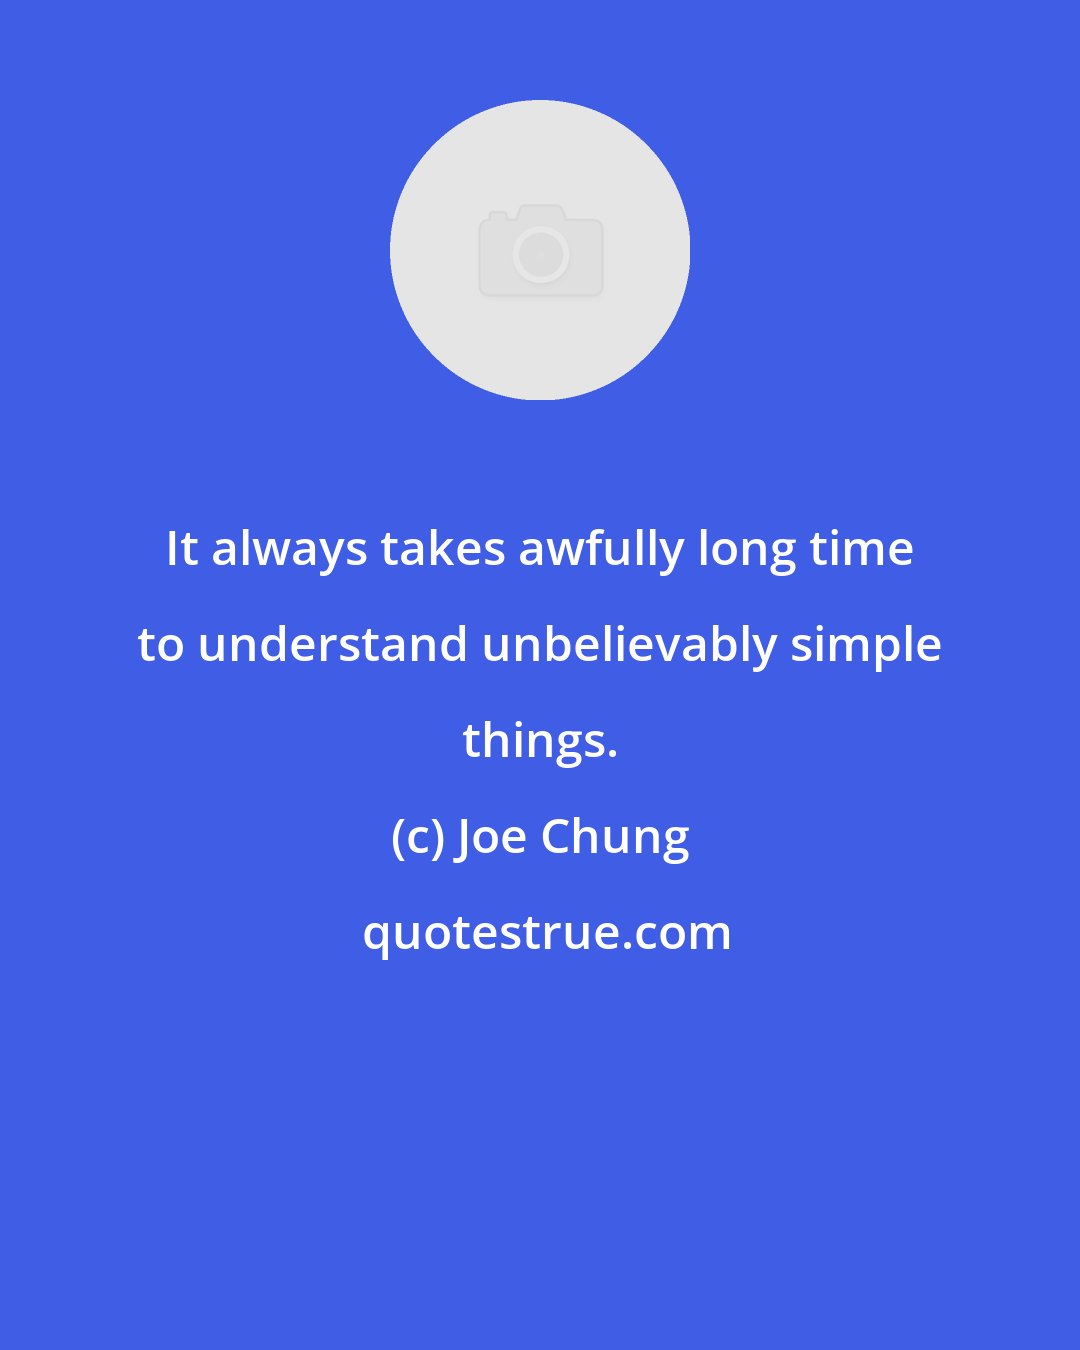 Joe Chung: It always takes awfully long time to understand unbelievably simple things.